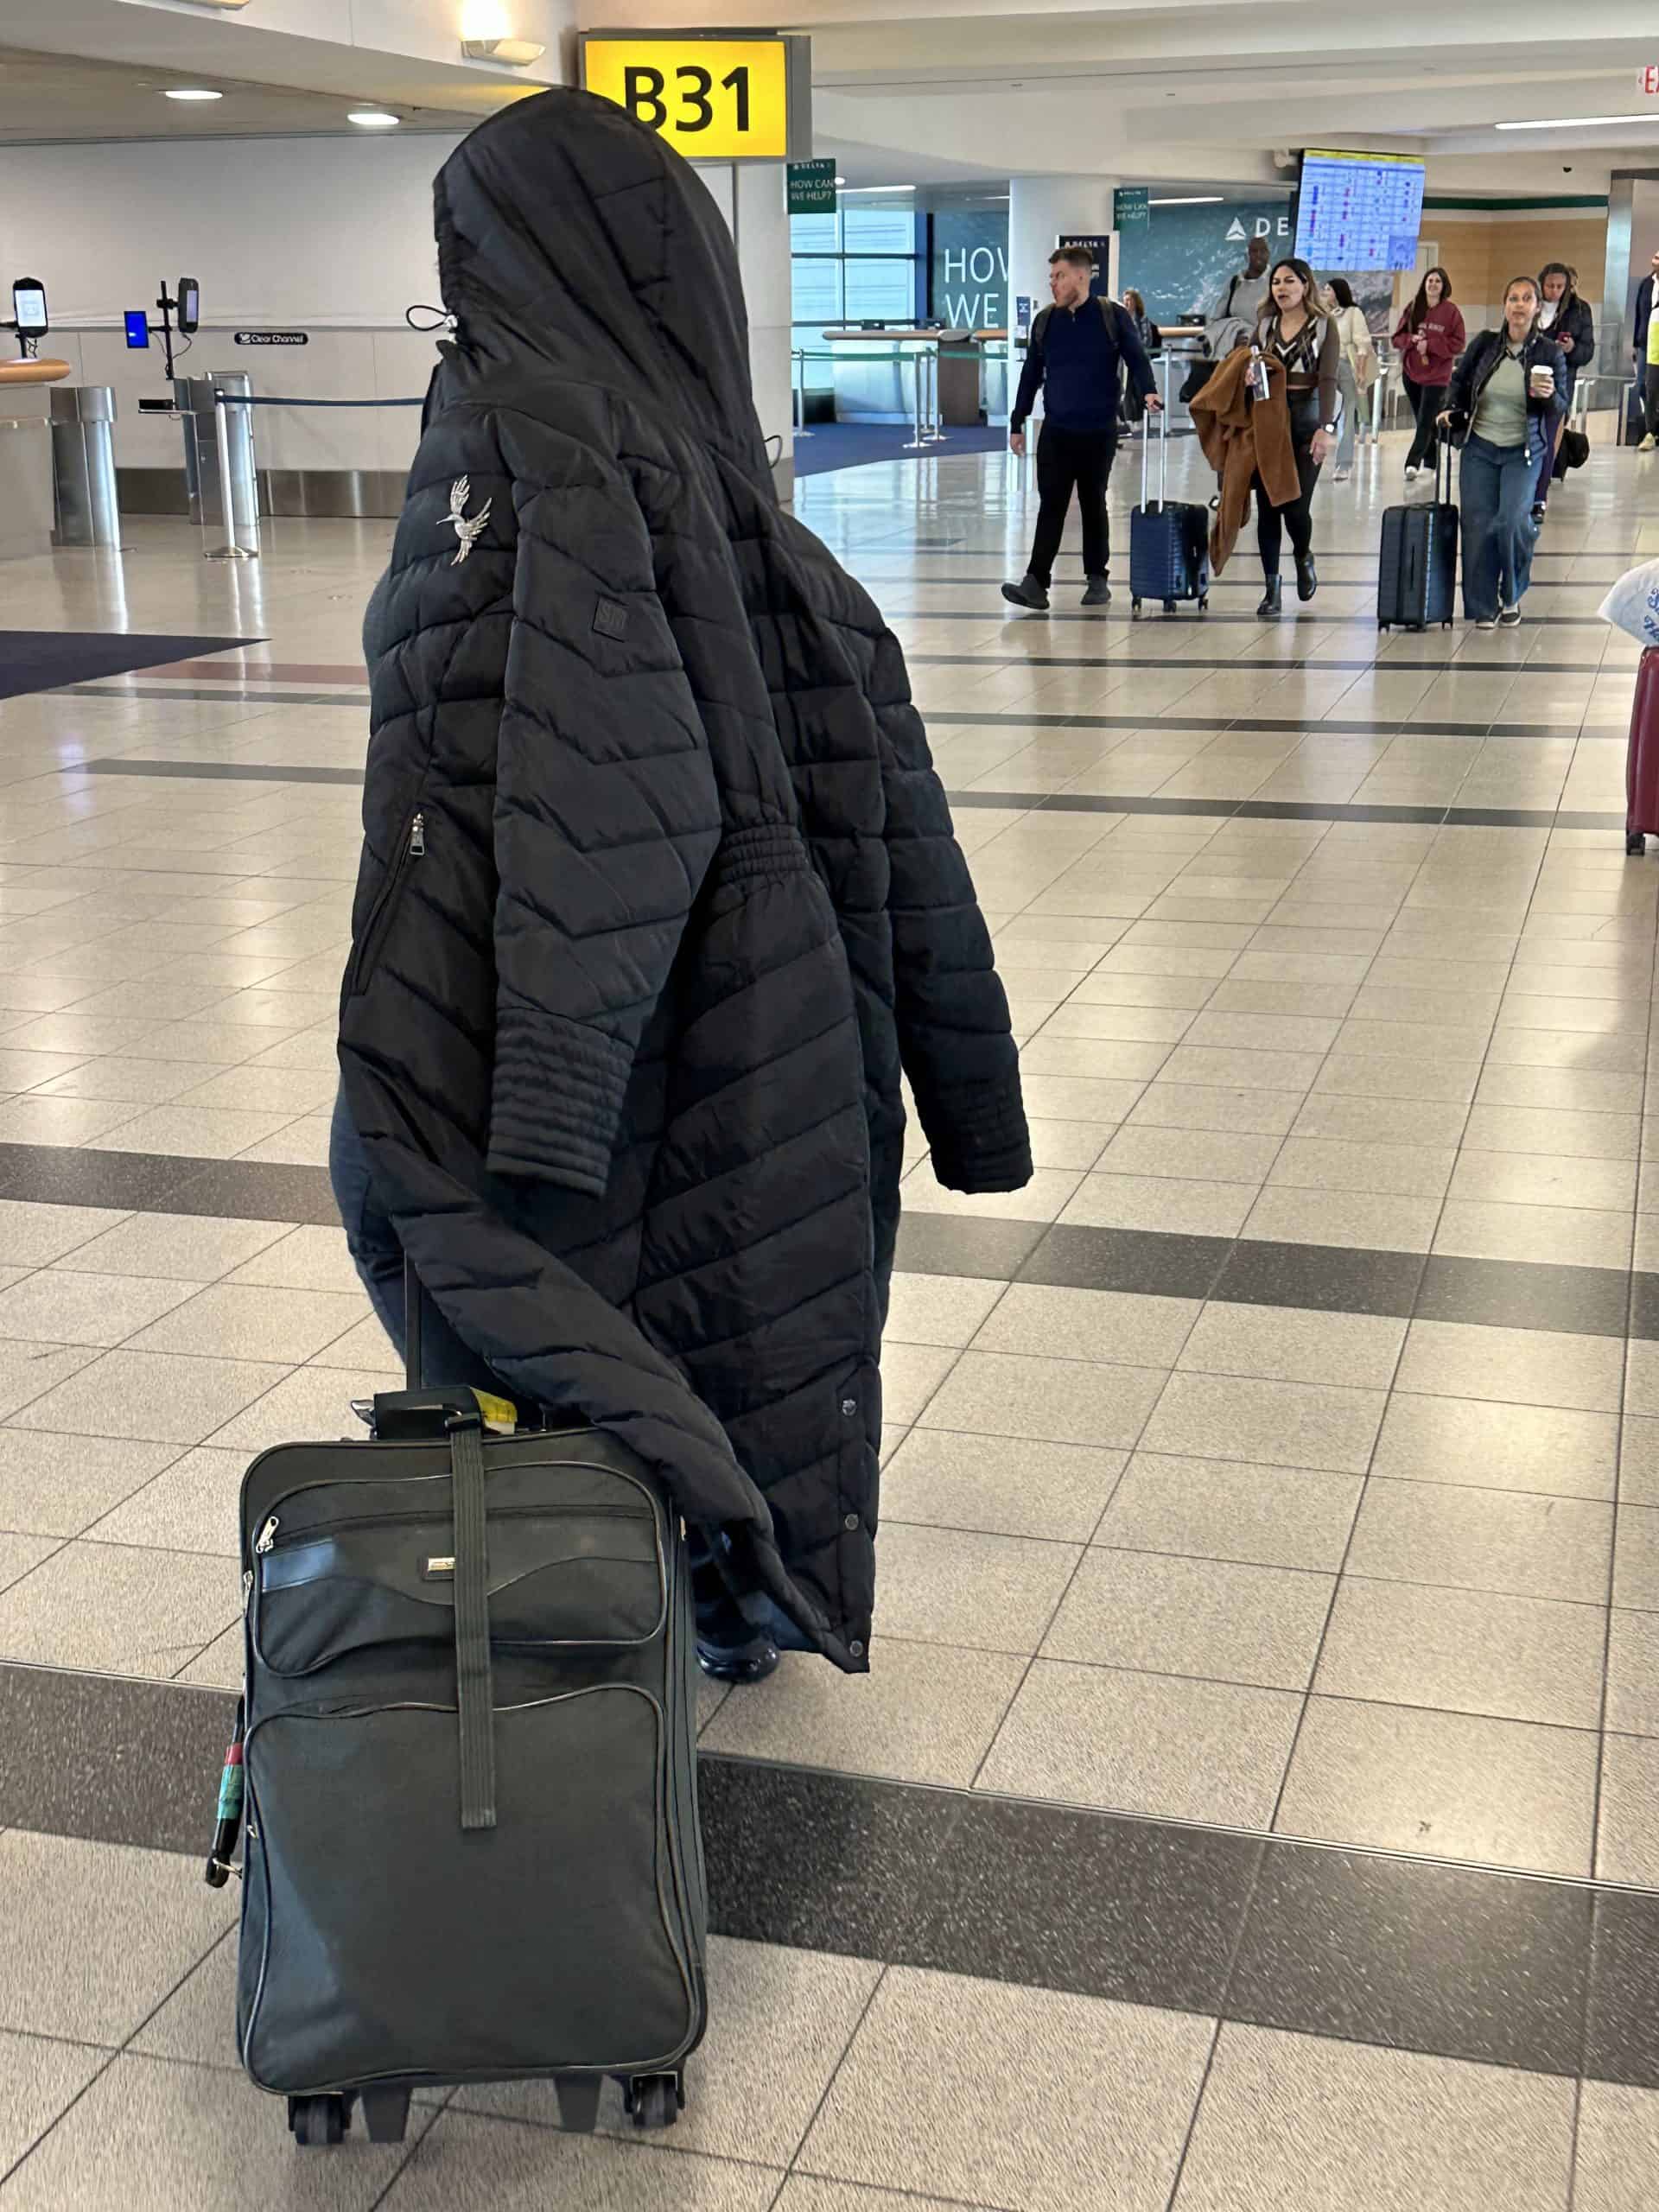 Lady dragging a too long, too heavy coat at JFK Airport